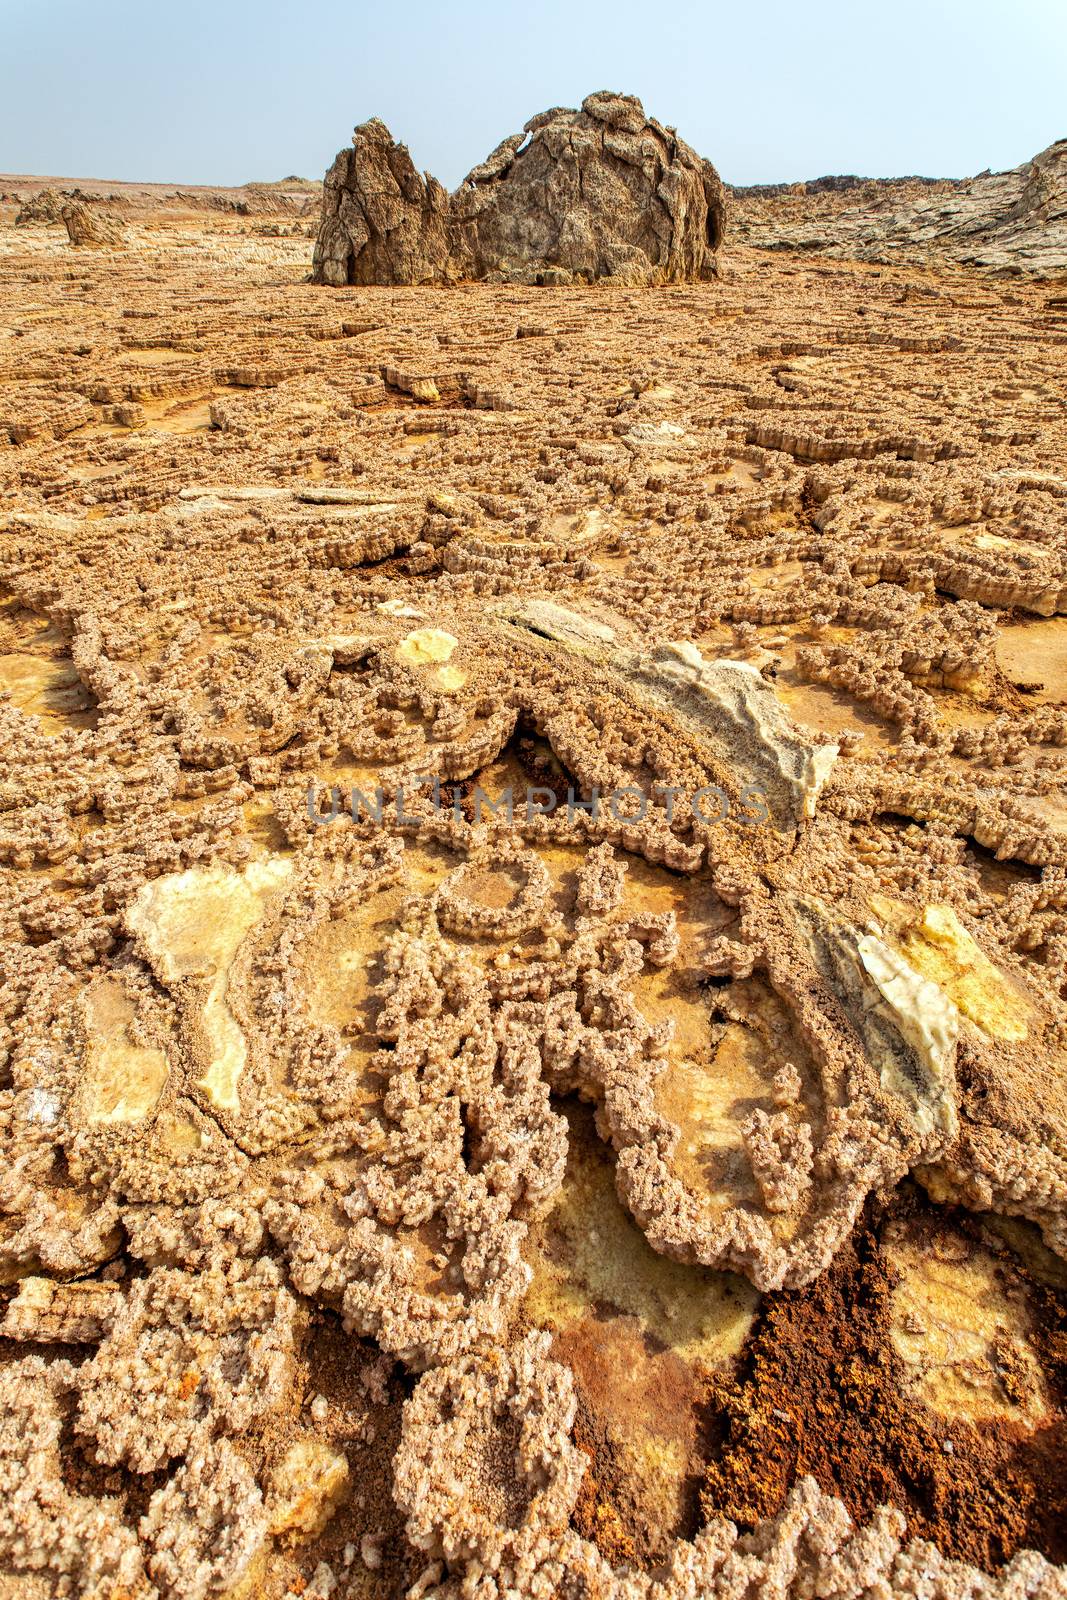 Dallol desert situated in the Afar Triangle with extreme temperature. Danakil Desert is one of the lowest and hottest places on Earth.